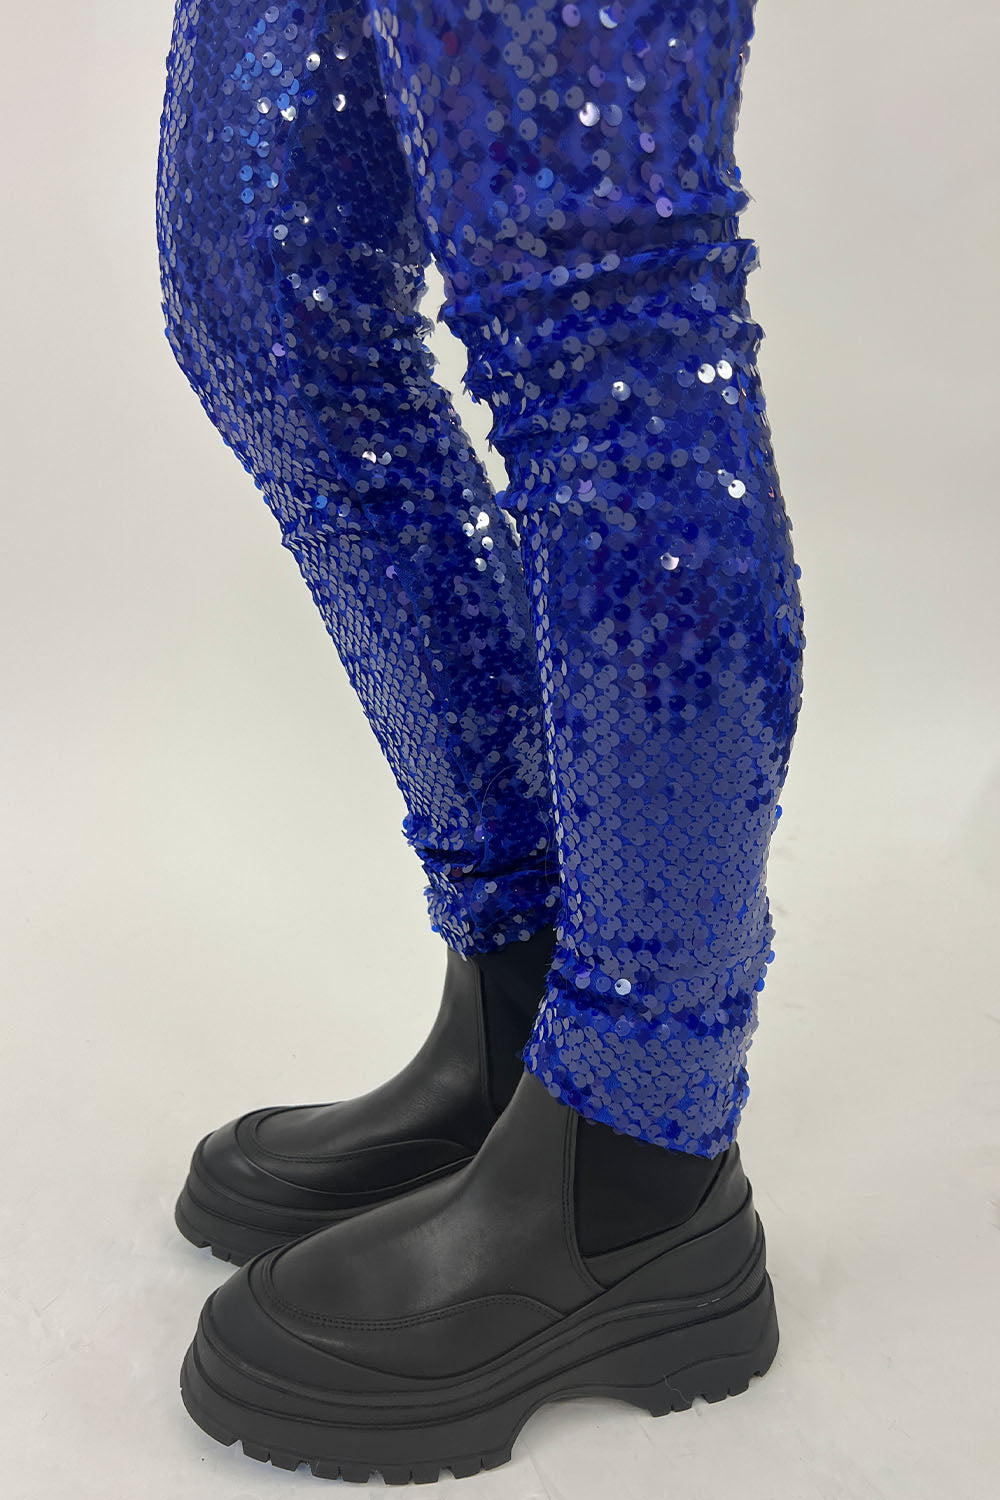 Ottod'ame - Persia Sequin Leggings: Blue – ouimillie